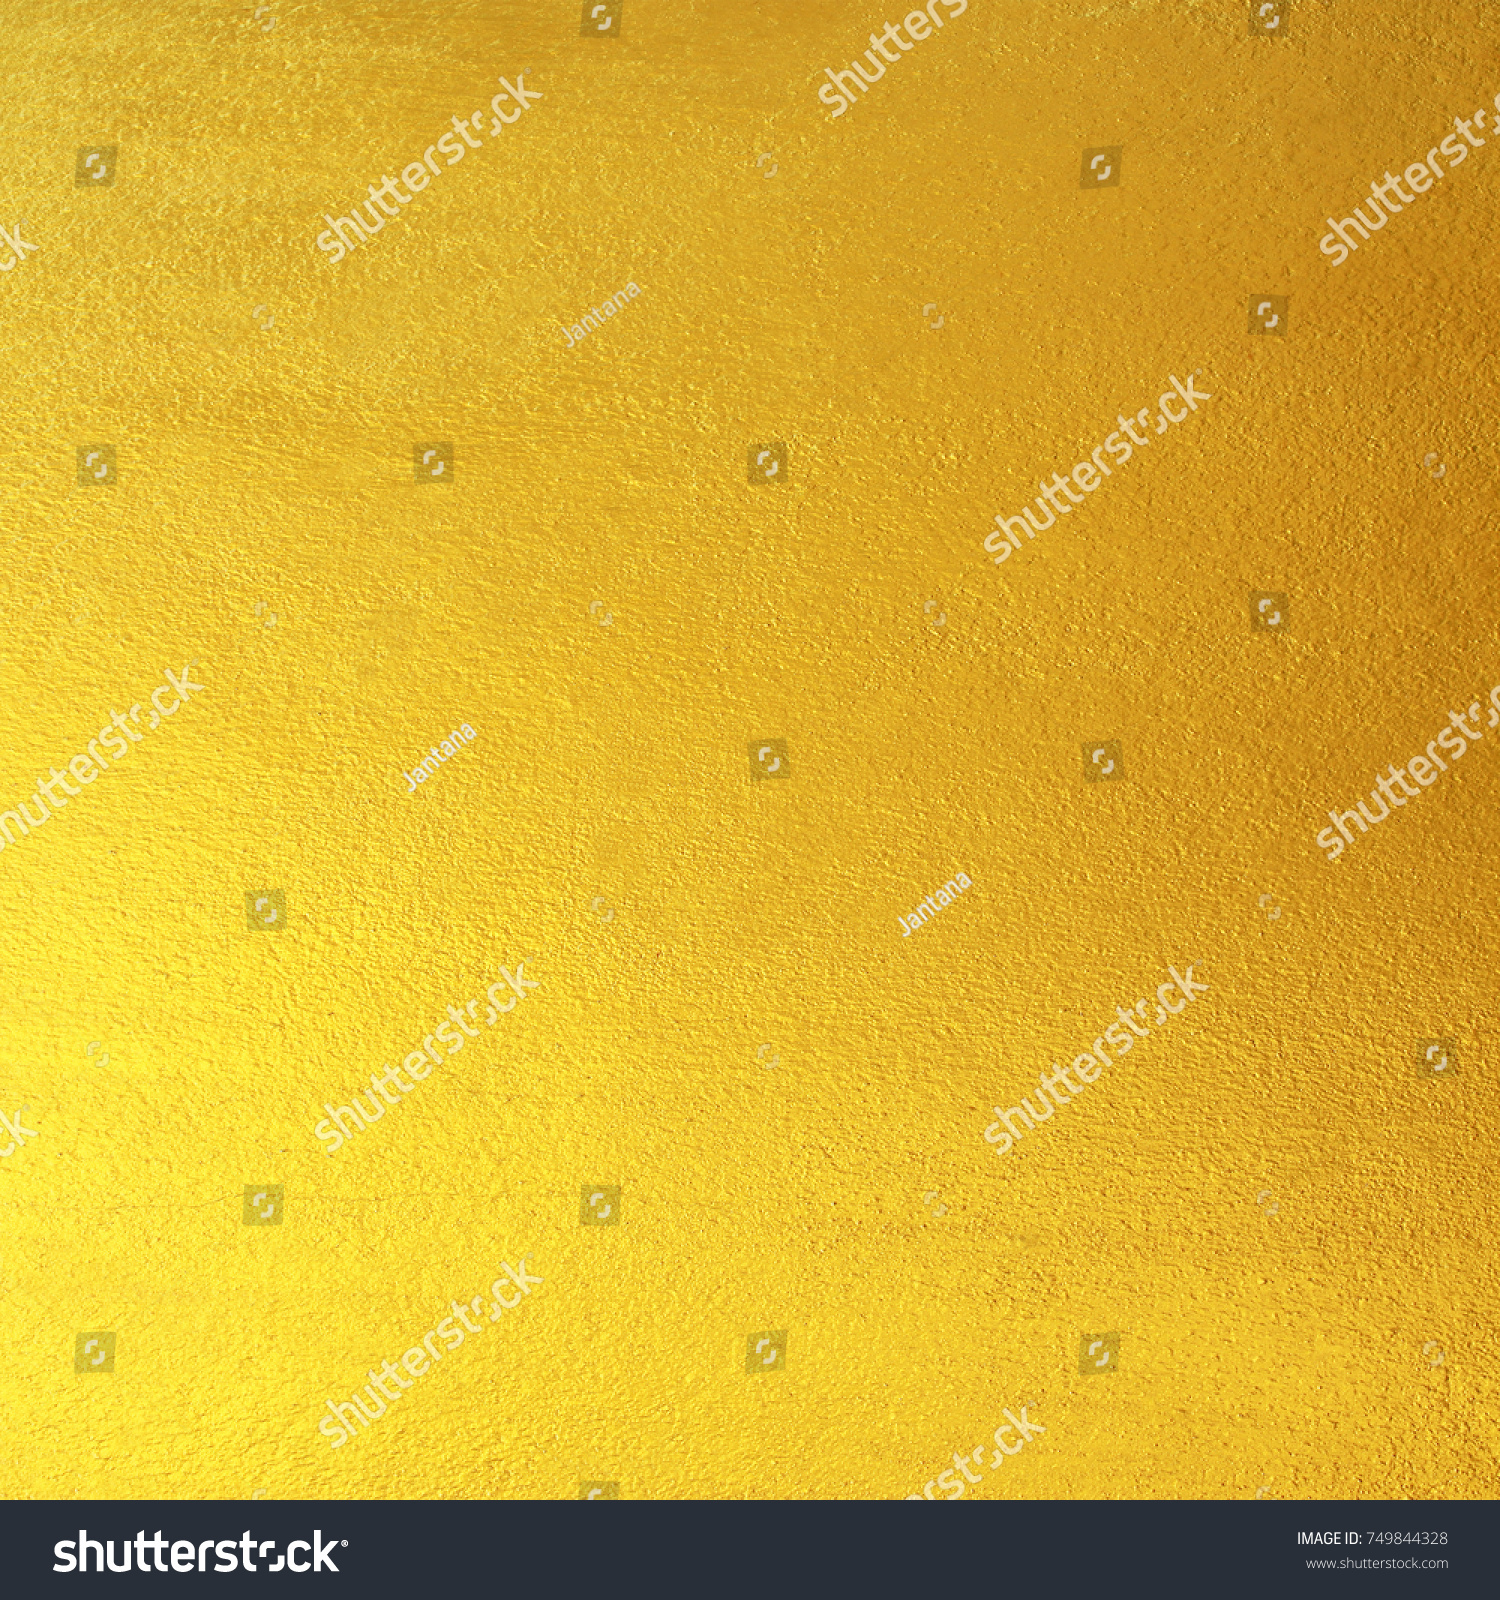 Abstract Gold Texture Gold Yellow Surface Stock Photo (Royalty Free ...